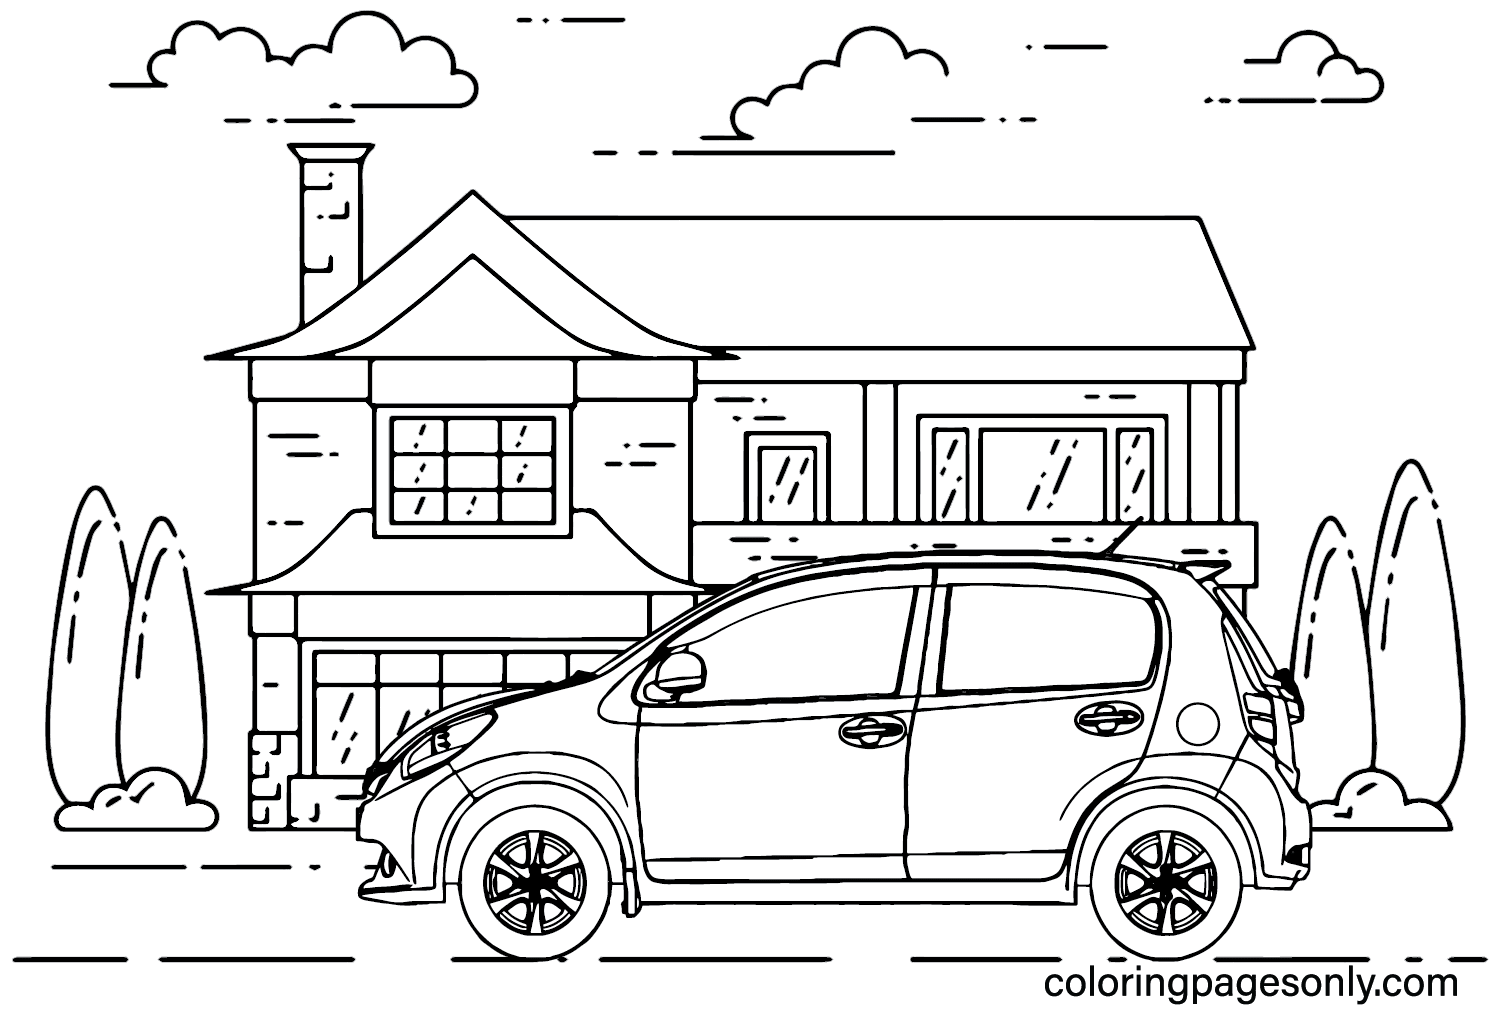 Perodua Car Coloring Page - Free Printable Coloring Pages